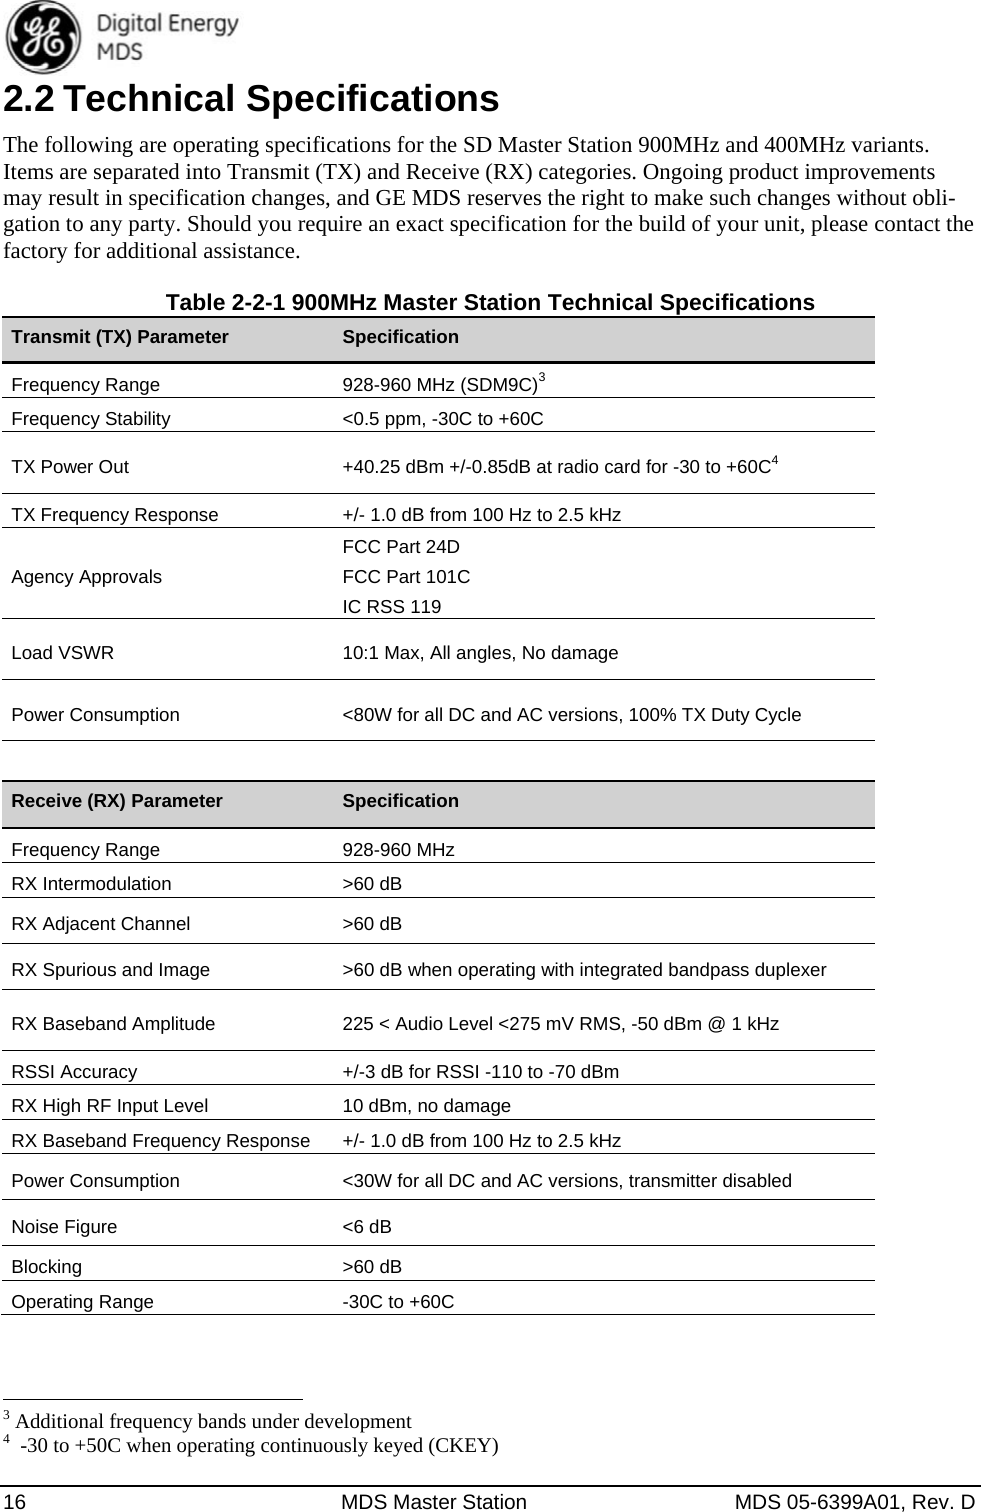  16  MDS Master Station  MDS 05-6399A01, Rev. D 2.2 Technical Specifications The following are operating specifications for the SD Master Station 900MHz and 400MHz variants. Items are separated into Transmit (TX) and Receive (RX) categories. Ongoing product improvements may result in specification changes, and GE MDS reserves the right to make such changes without obli-gation to any party. Should you require an exact specification for the build of your unit, please contact the factory for additional assistance. Table 2-2-1 900MHz Master Station Technical Specifications Transmit (TX) Parameter  Specification Frequency Range    928-960 MHz (SDM9C)3 Frequency Stability  &lt;0.5 ppm, -30C to +60C TX Power Out  +40.25 dBm +/-0.85dB at radio card for -30 to +60C4 TX Frequency Response  +/- 1.0 dB from 100 Hz to 2.5 kHz Agency Approvals FCC Part 24D FCC Part 101C IC RSS 119   Load VSWR  10:1 Max, All angles, No damage Power Consumption  &lt;80W for all DC and AC versions, 100% TX Duty Cycle   Receive (RX) Parameter  Specification Frequency Range  928-960 MHz RX Intermodulation  &gt;60 dB RX Adjacent Channel  &gt;60 dB RX Spurious and Image  &gt;60 dB when operating with integrated bandpass duplexer RX Baseband Amplitude  225 &lt; Audio Level &lt;275 mV RMS, -50 dBm @ 1 kHz RSSI Accuracy  +/-3 dB for RSSI -110 to -70 dBm RX High RF Input Level  10 dBm, no damage RX Baseband Frequency Response  +/- 1.0 dB from 100 Hz to 2.5 kHz Power Consumption  &lt;30W for all DC and AC versions, transmitter disabled Noise Figure  &lt;6 dB Blocking  &gt;60 dB Operating Range  -30C to +60C                                                       3 Additional frequency bands under development 4  -30 to +50C when operating continuously keyed (CKEY) 